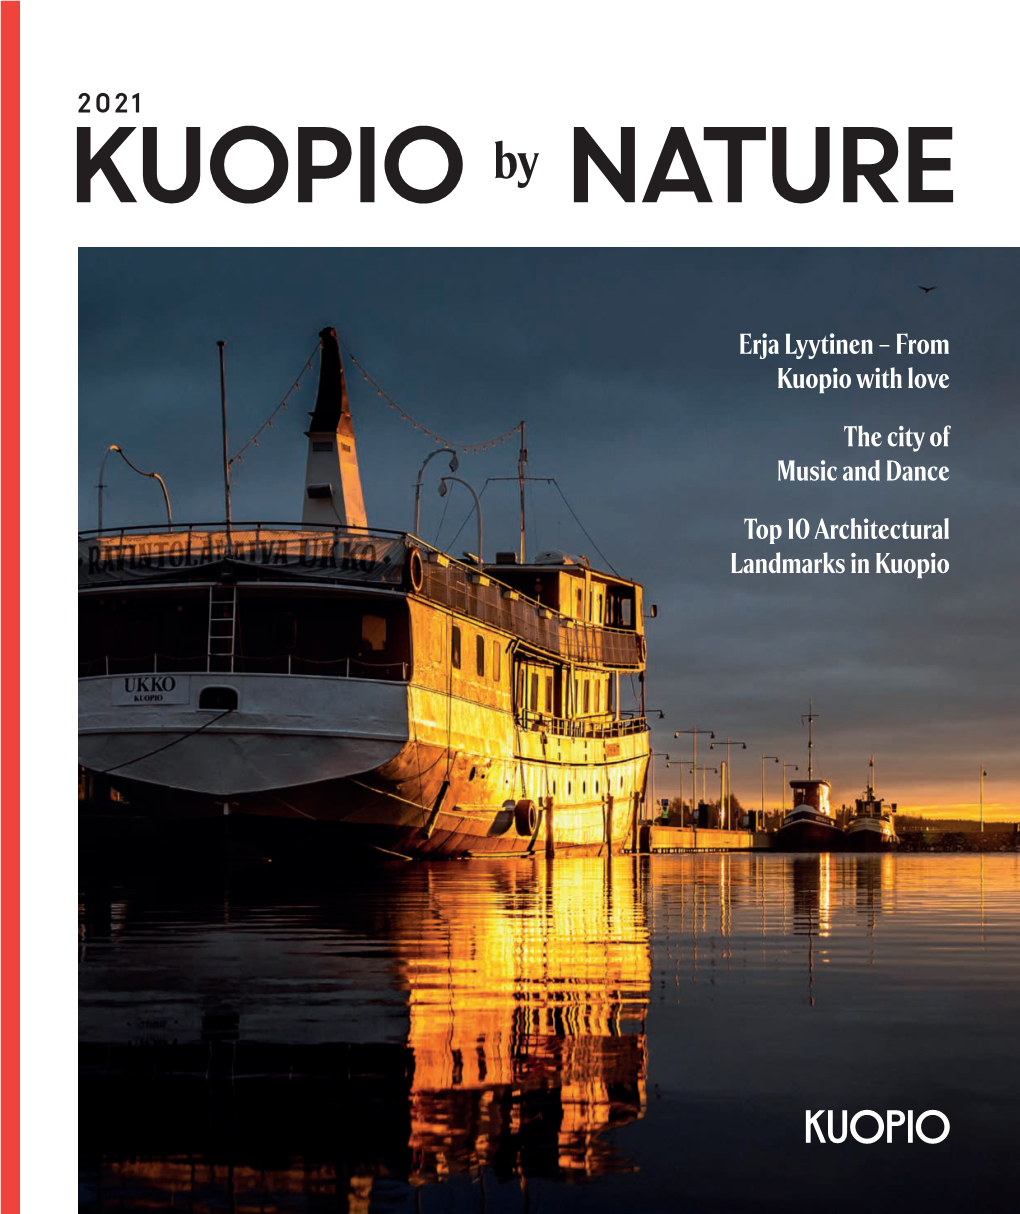 KUOPIO by NATURE 2021 KUOPIO by NATURE 2021 3 a Fascinating Moment in the City Harbour of Kuopio